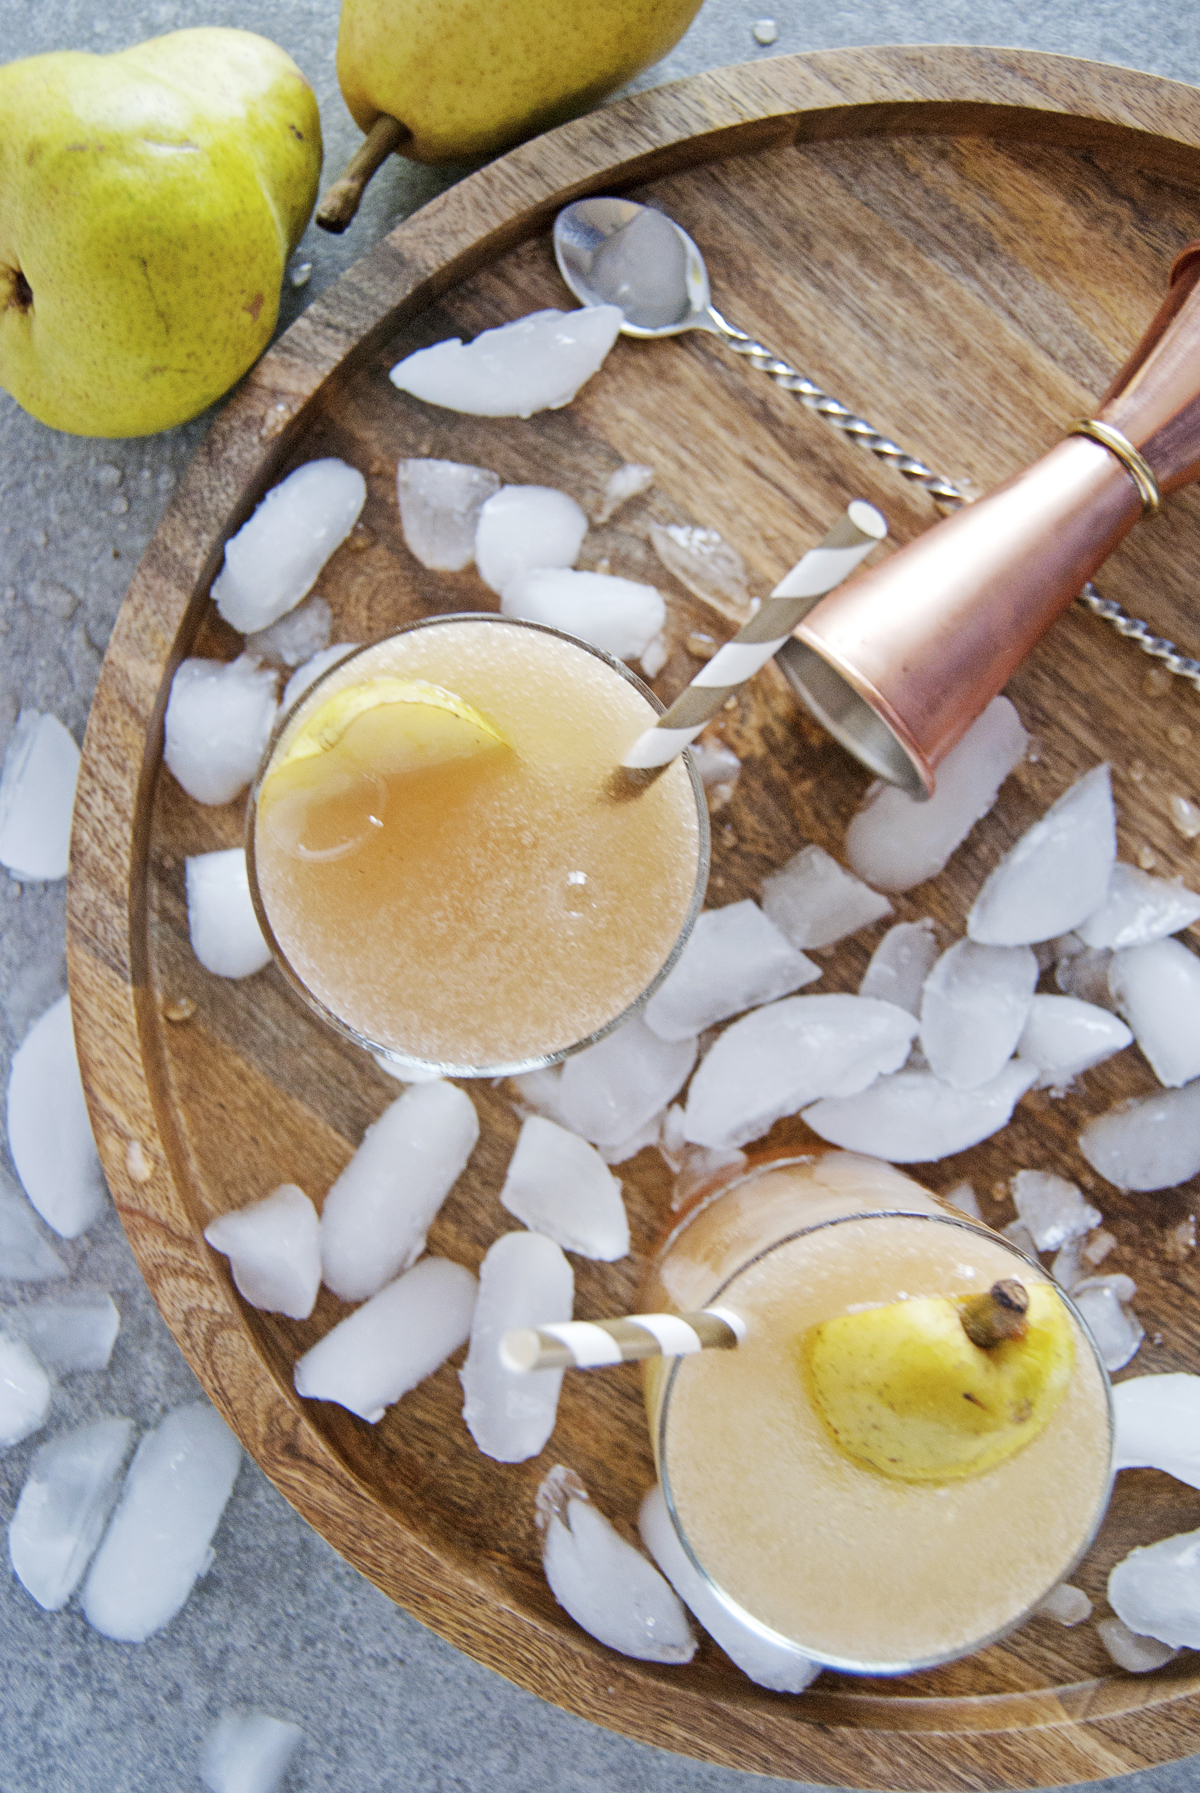 These cardamom pear spritzer cocktails feature delicious fresh pear juice, white rum, and a homemade honey cardamom simple syrup.